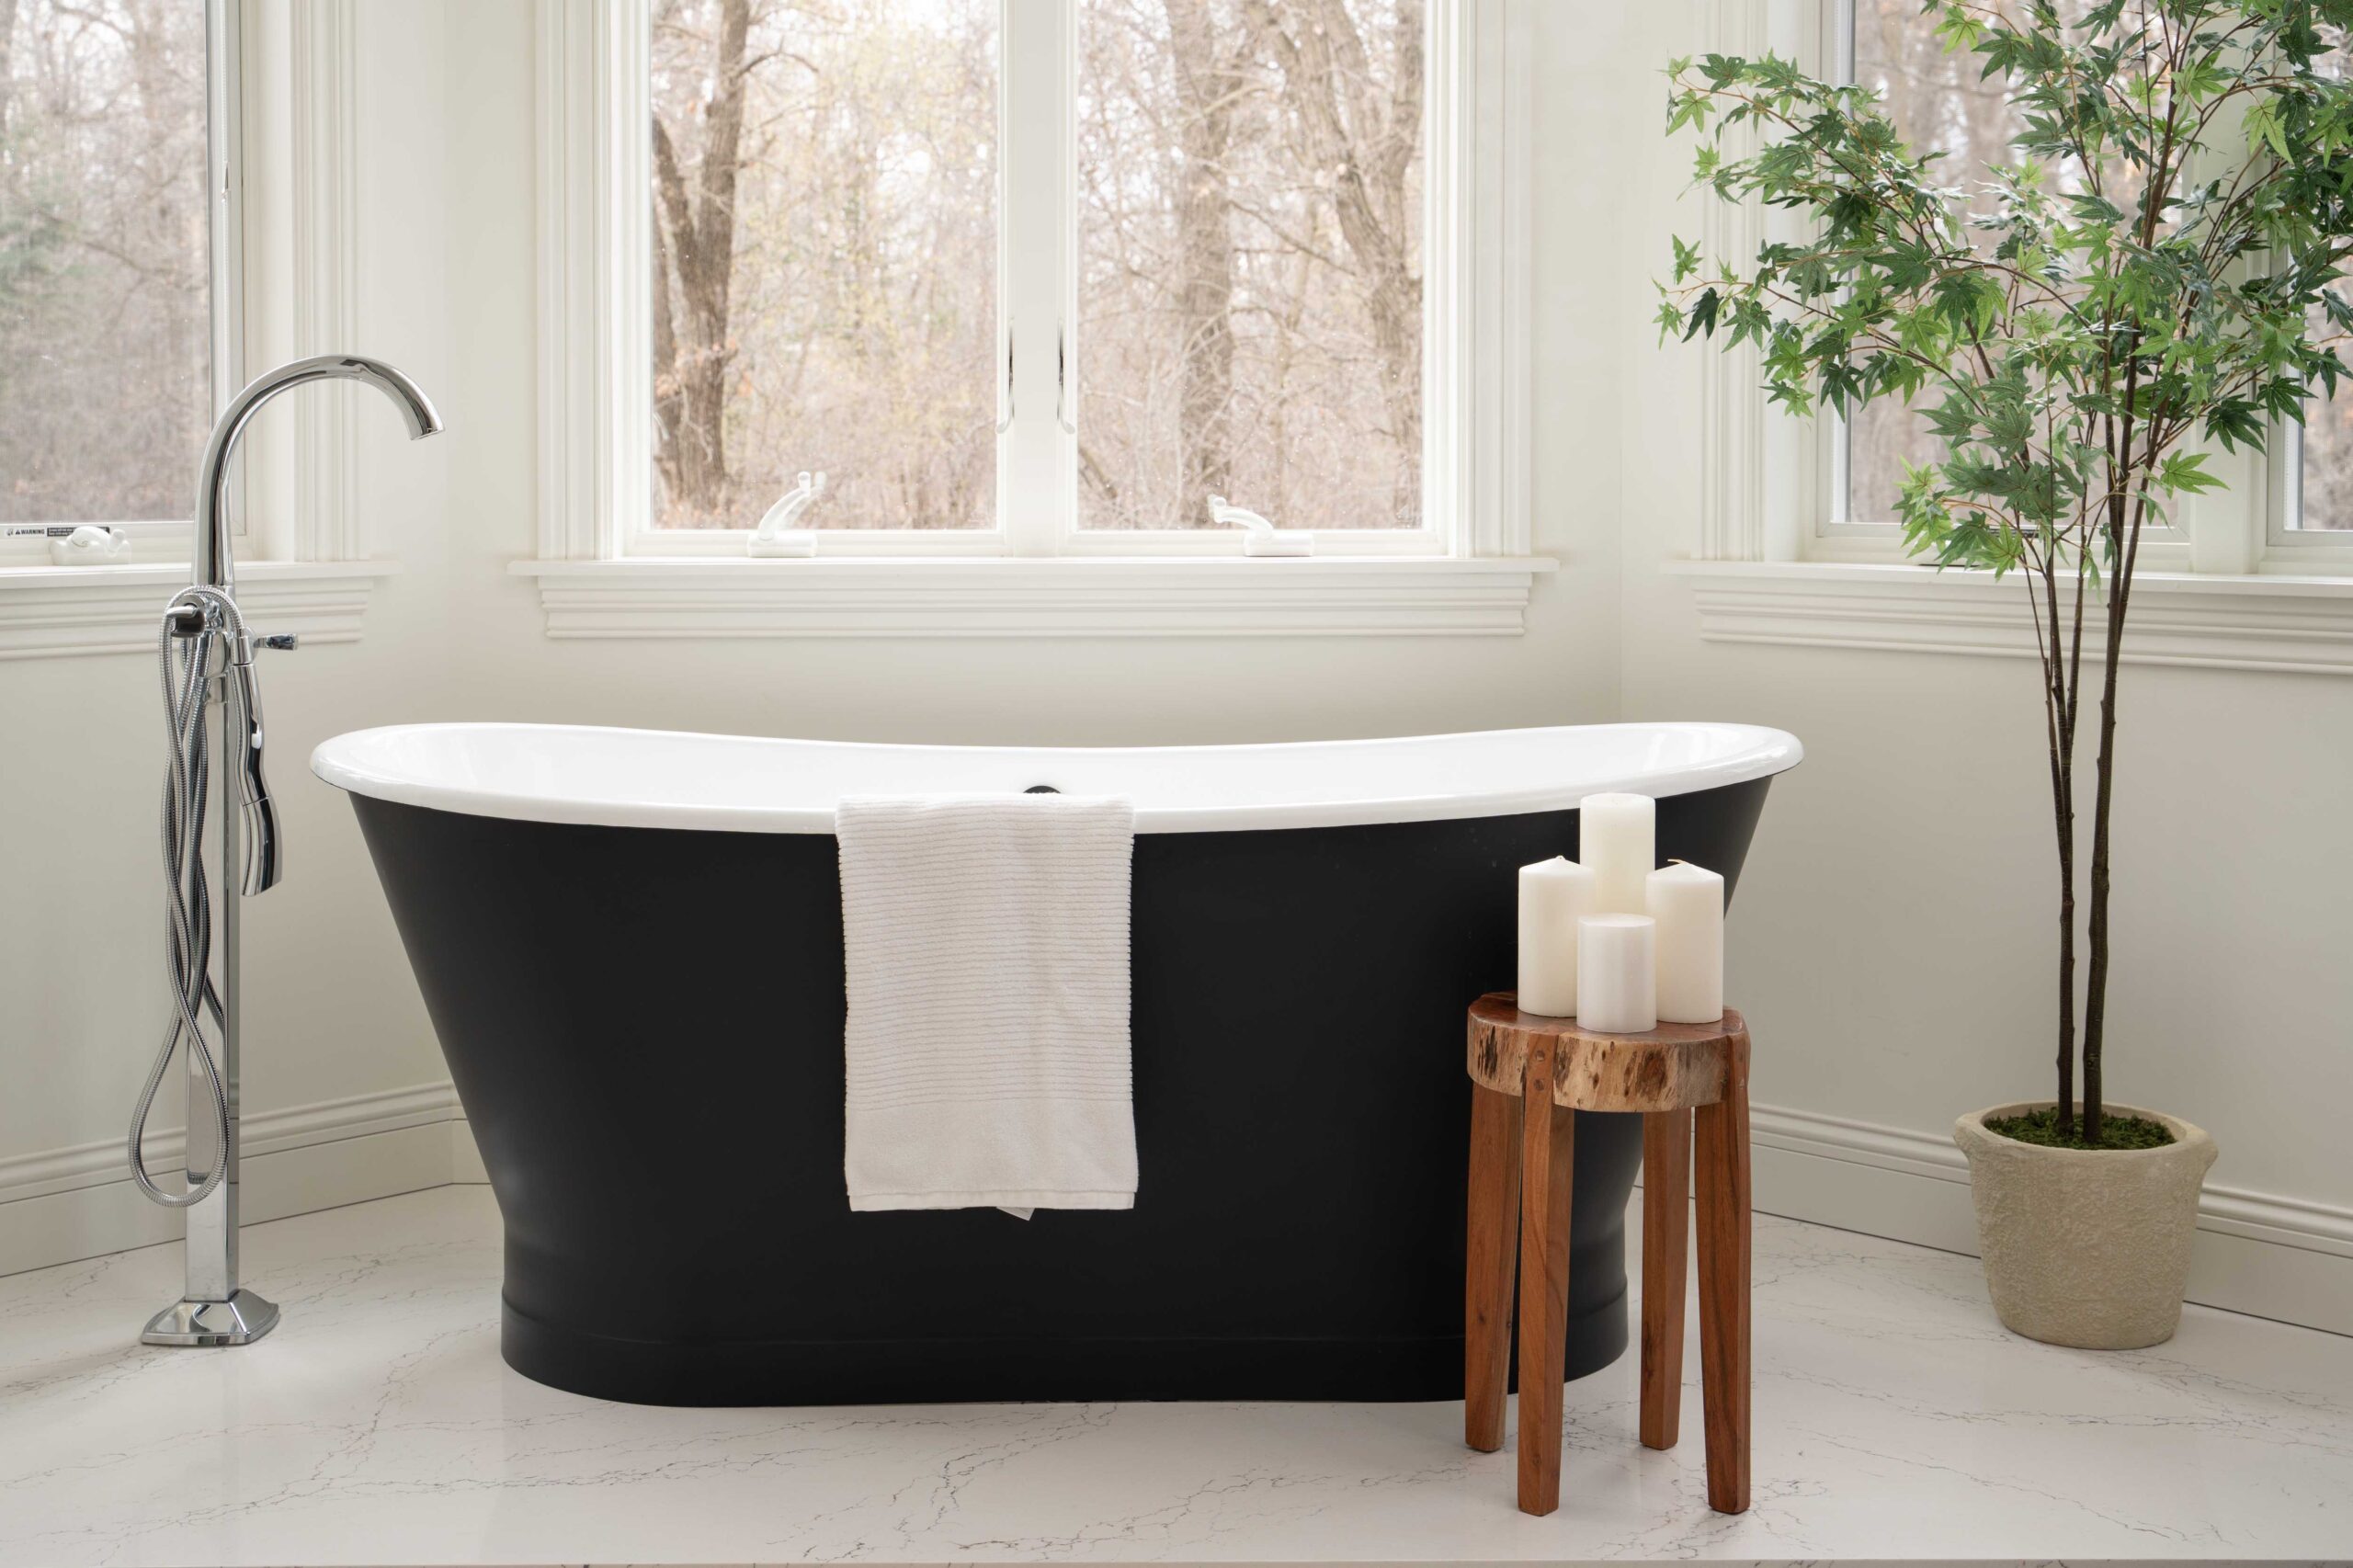 A modern bathroom remodel featuring a black tub and a window for natural light.